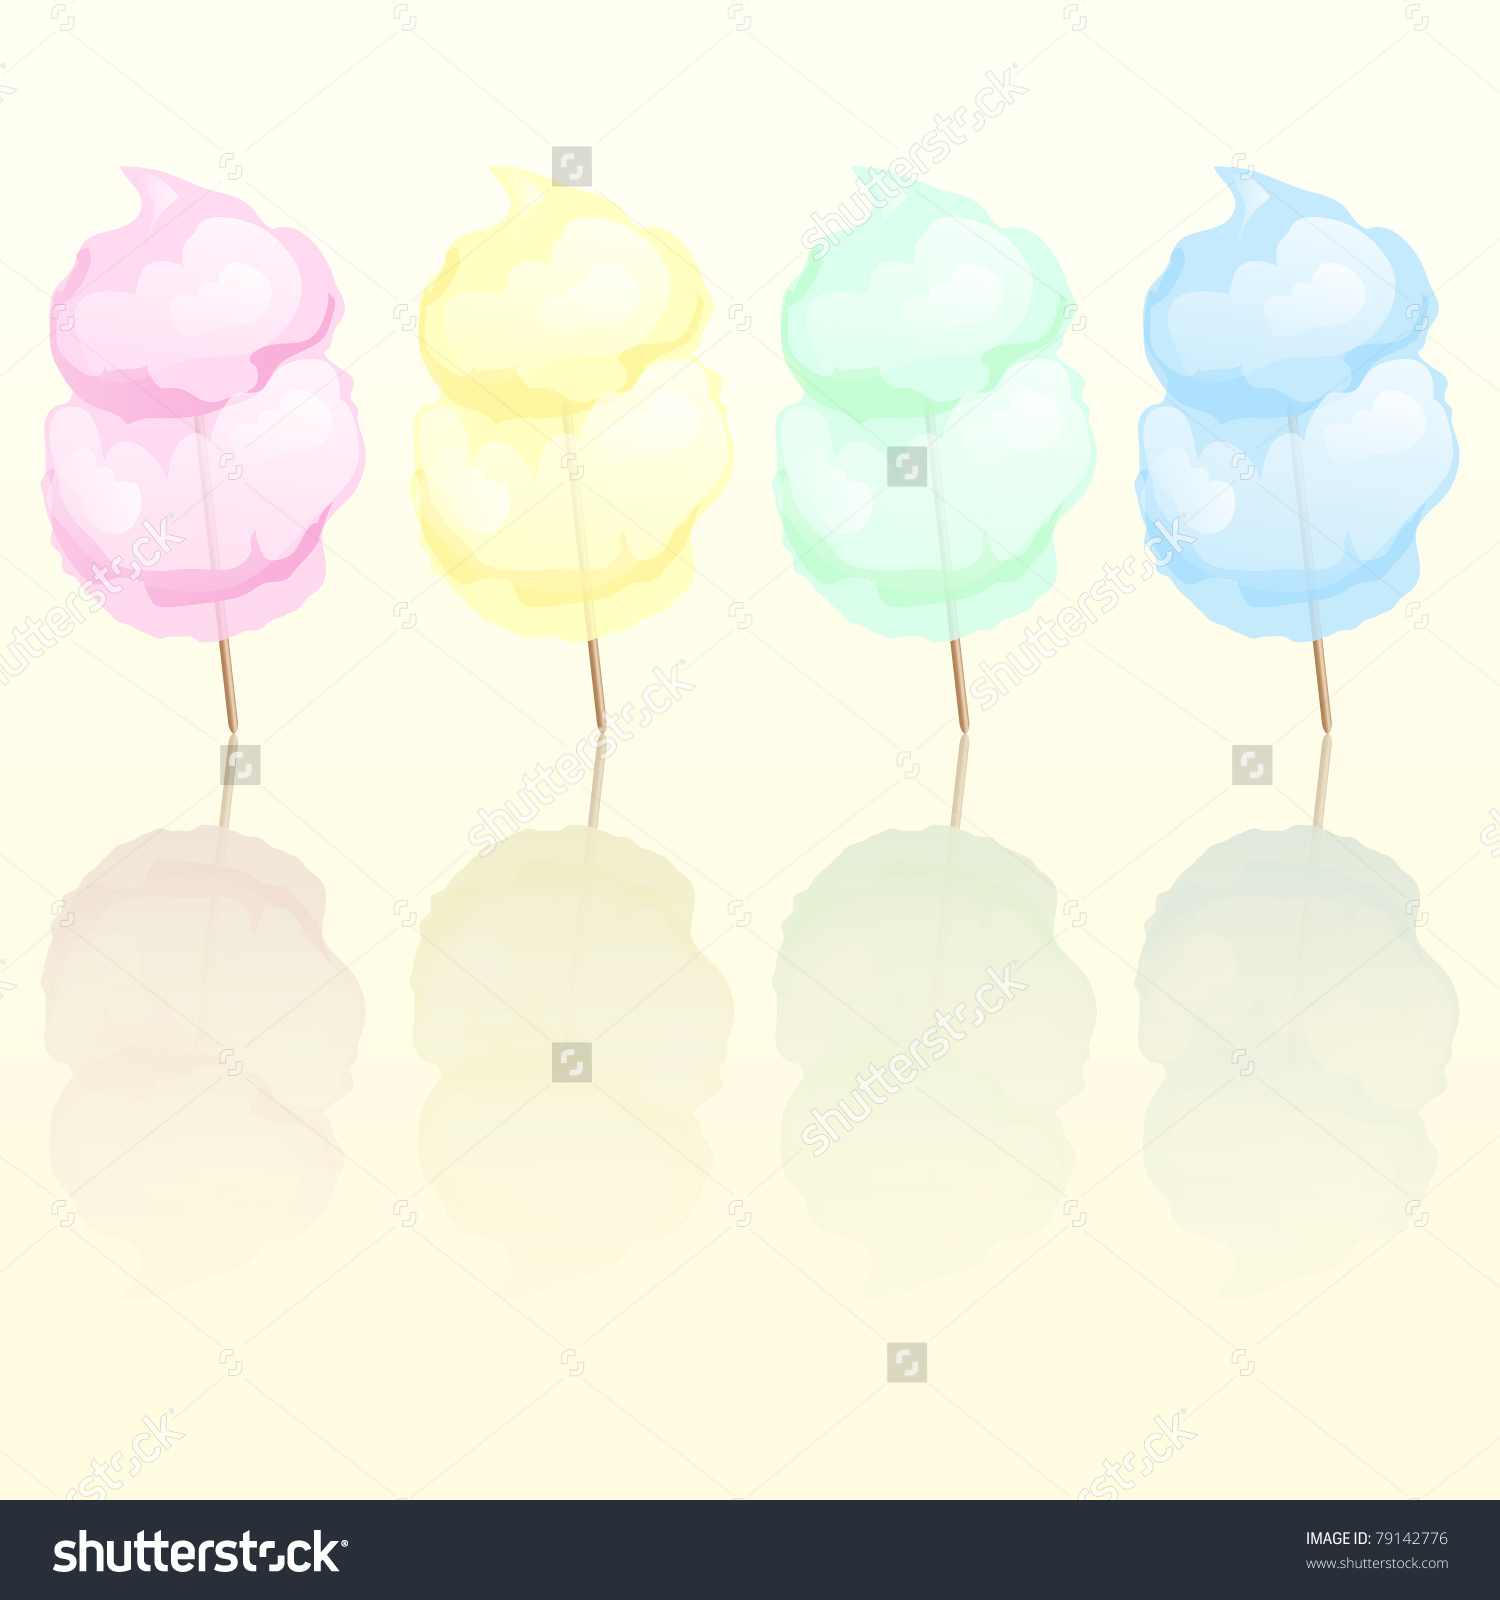 Candy Floss In Four Different Colours Reflected. Eps10 Vector.